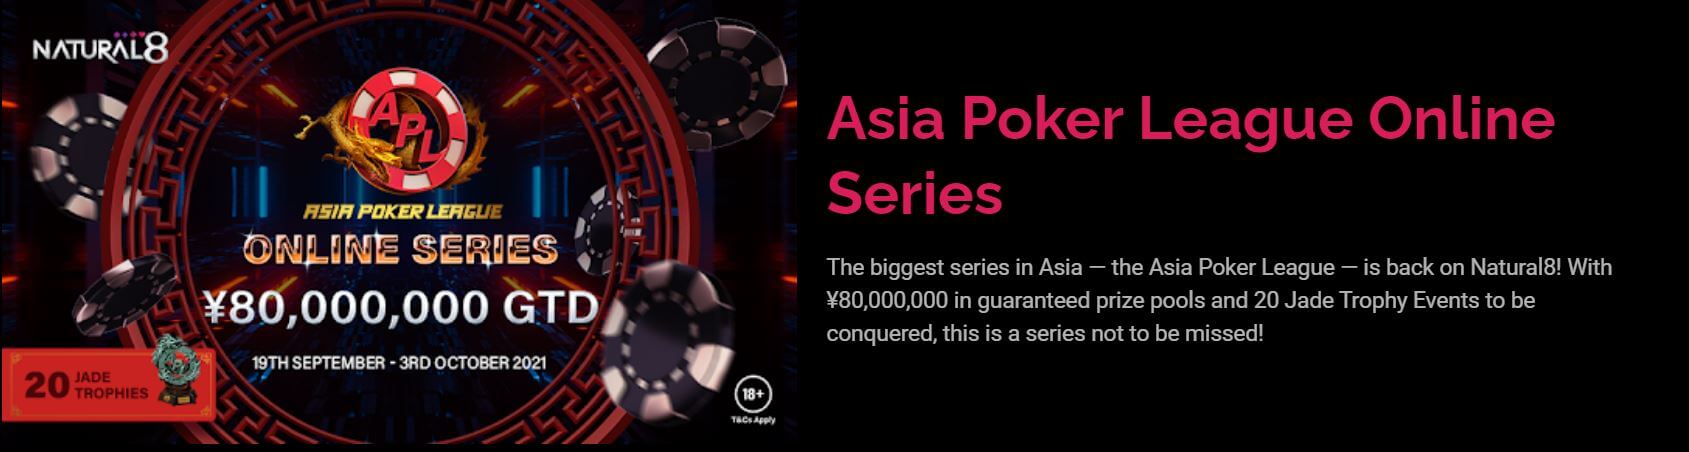 Don’t miss the ¥3,880,000 GTD APL Autumn Championship this Sunday on Natural8